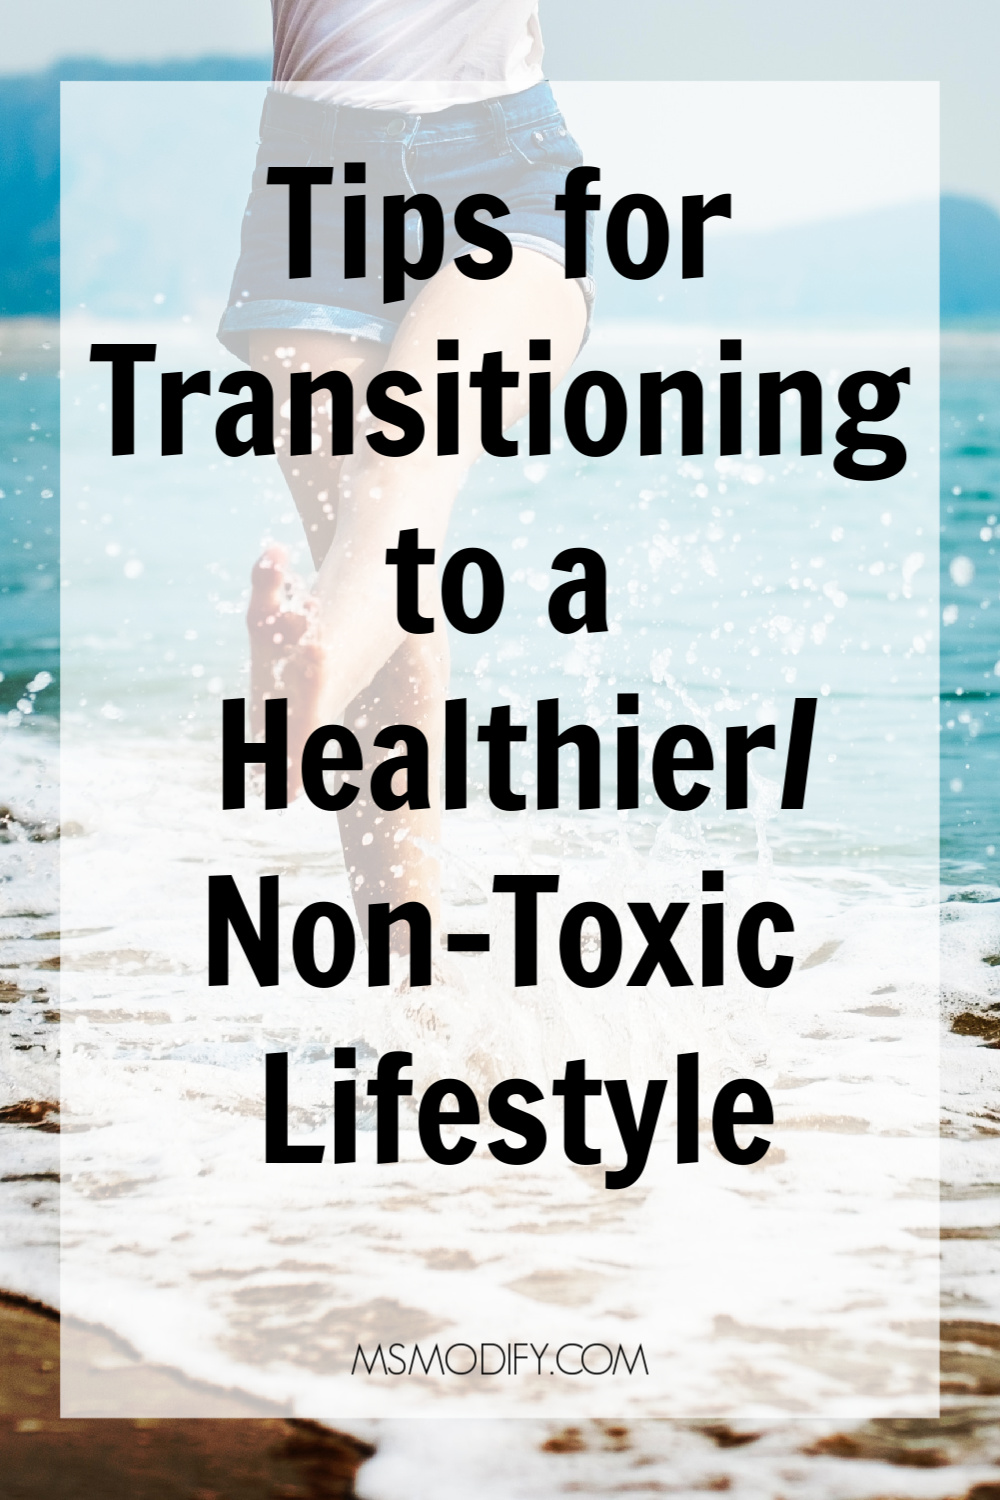 Tips for Transitioning to a Healthier/Non-Toxic Lifestyle